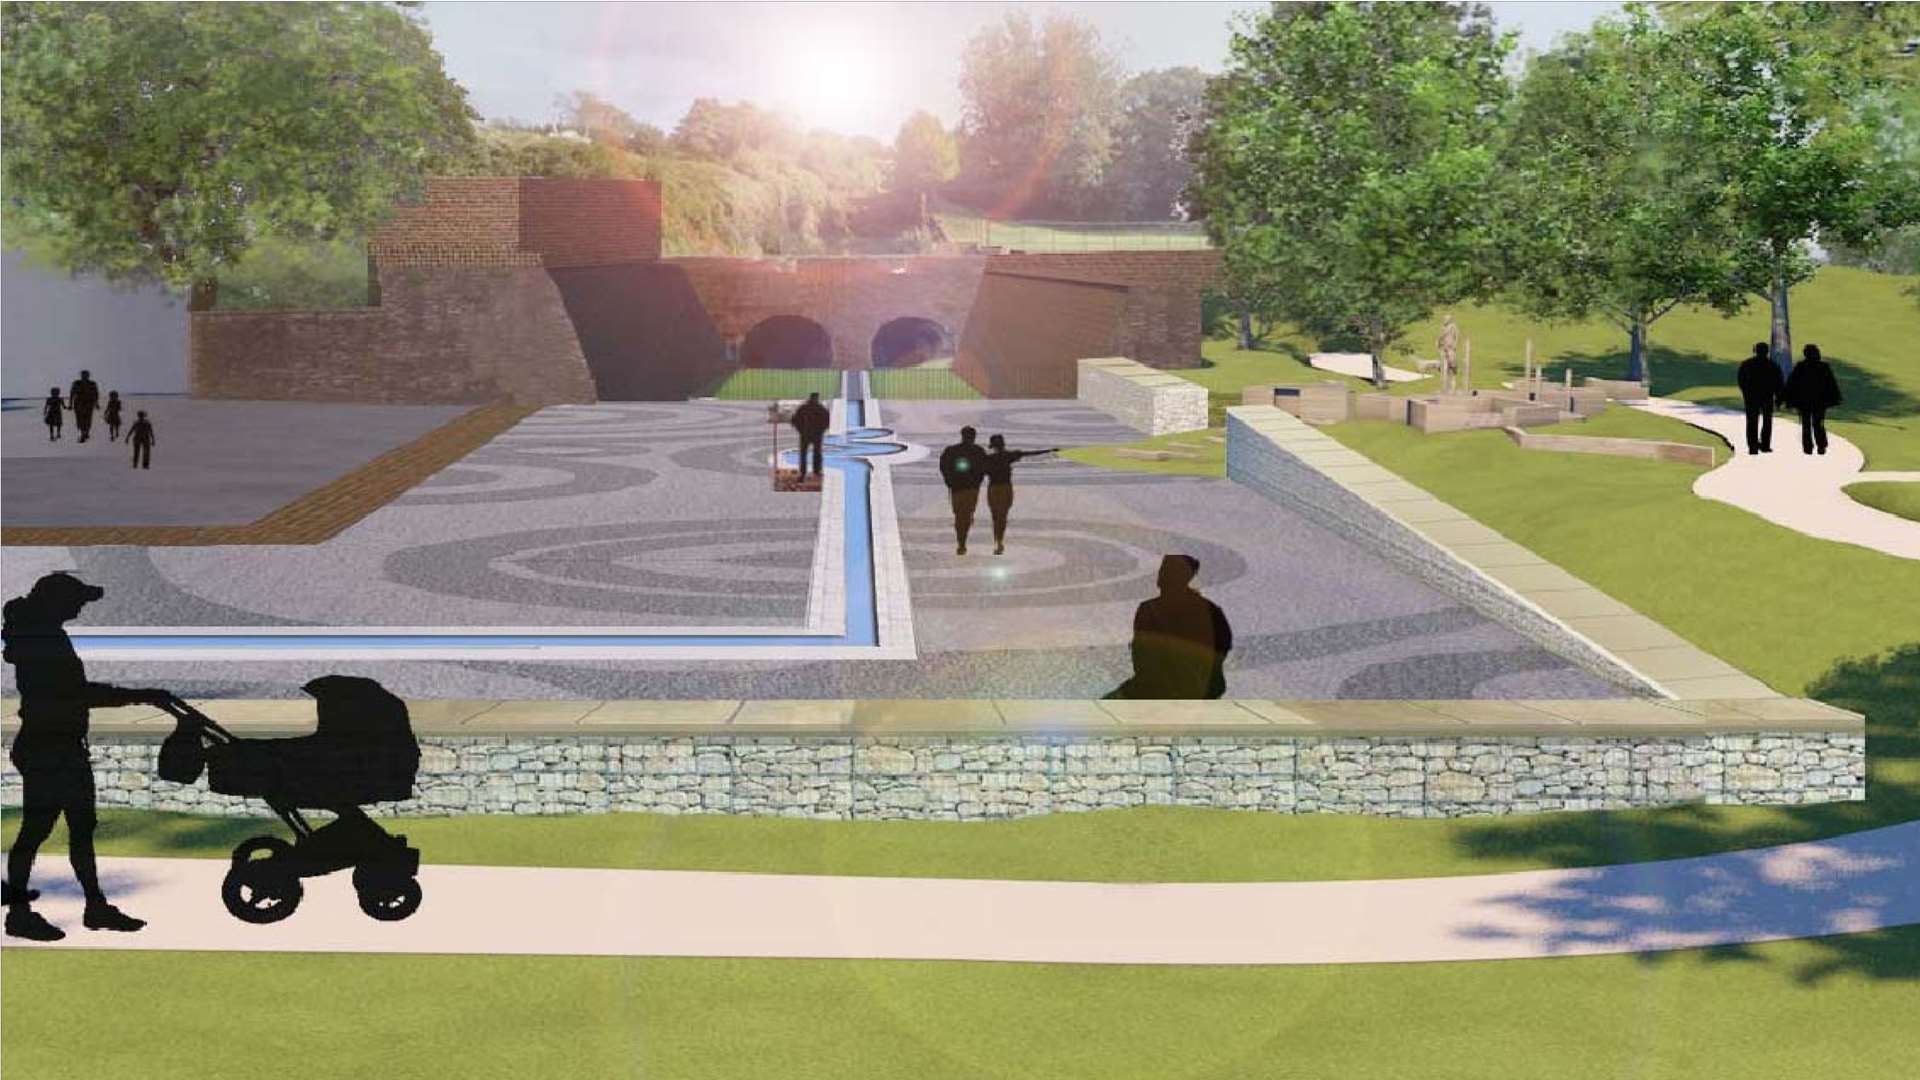 The Barrier Ditch will be reopened to create a public space. Picture: Medway Council